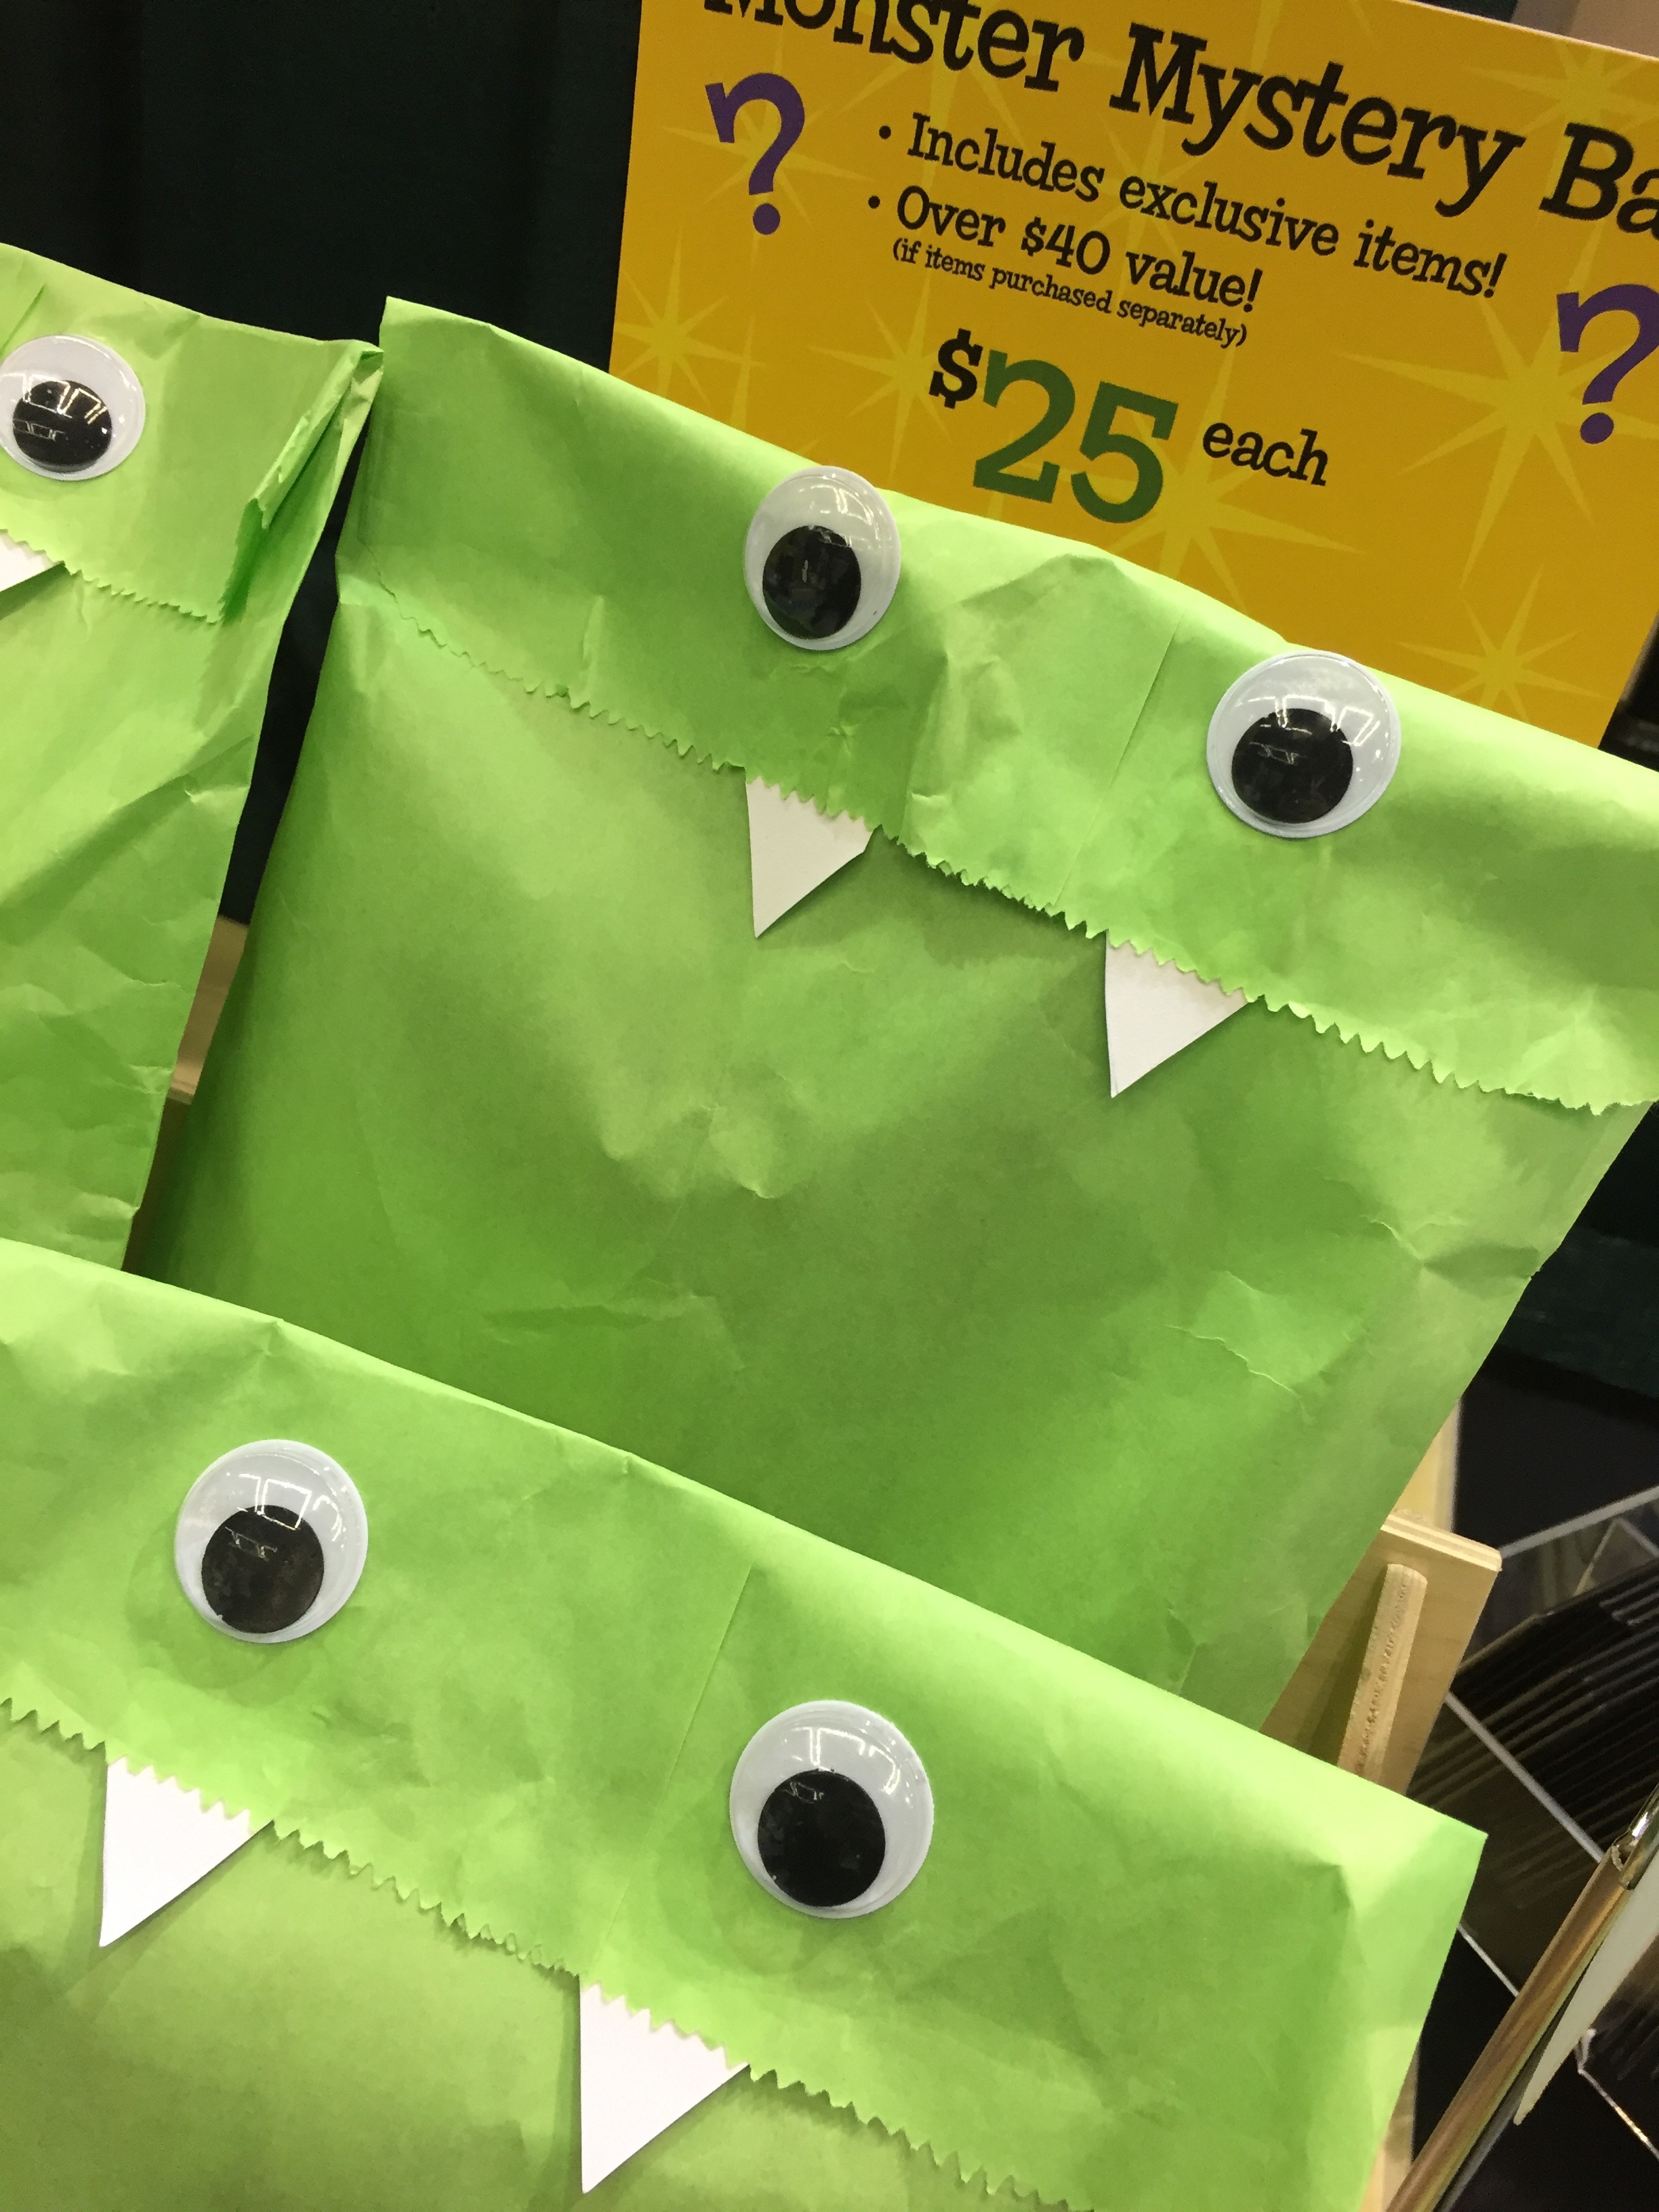 Photo of several Monster Mystery Bags, with googly eyes and fangs